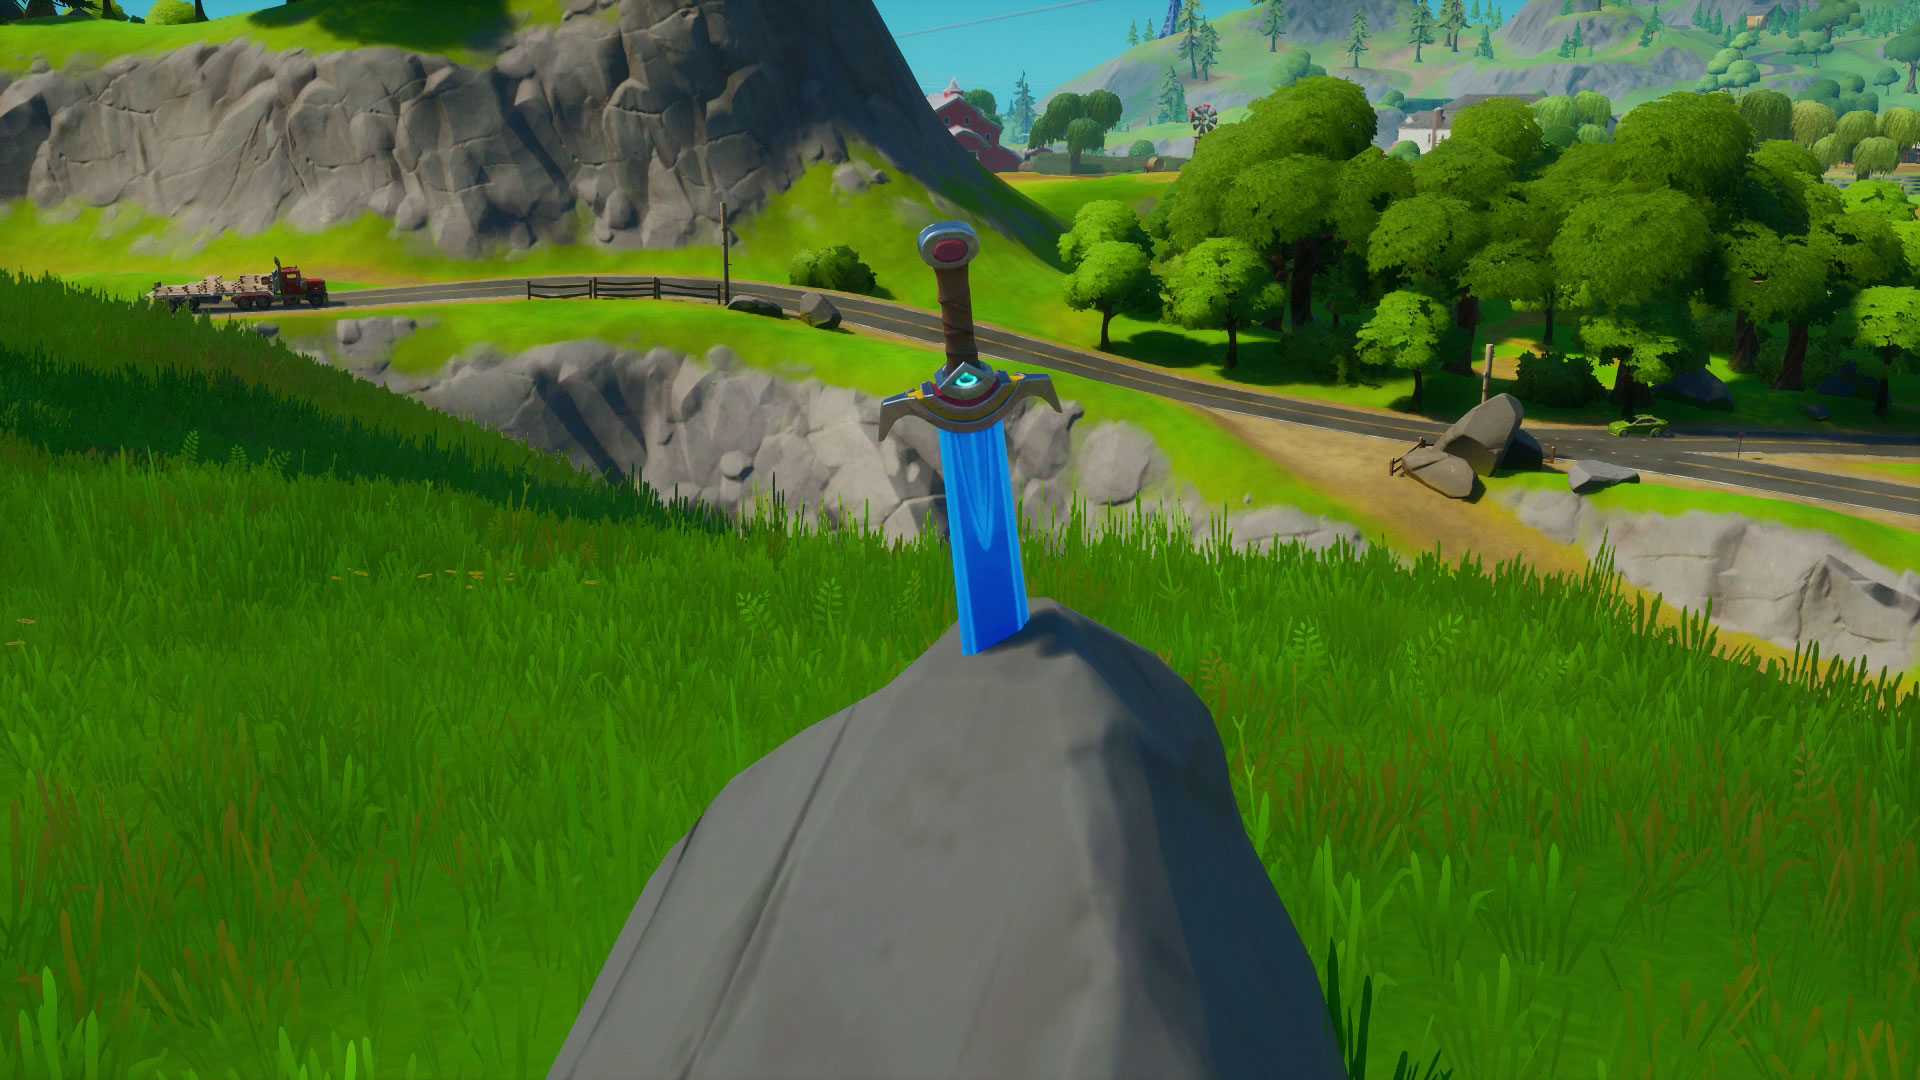 Fortnite Skye S Sword Locations Where To Search Skye S Sword In A Stone Found In High Places Gamesradar - using the shadow sword roblox